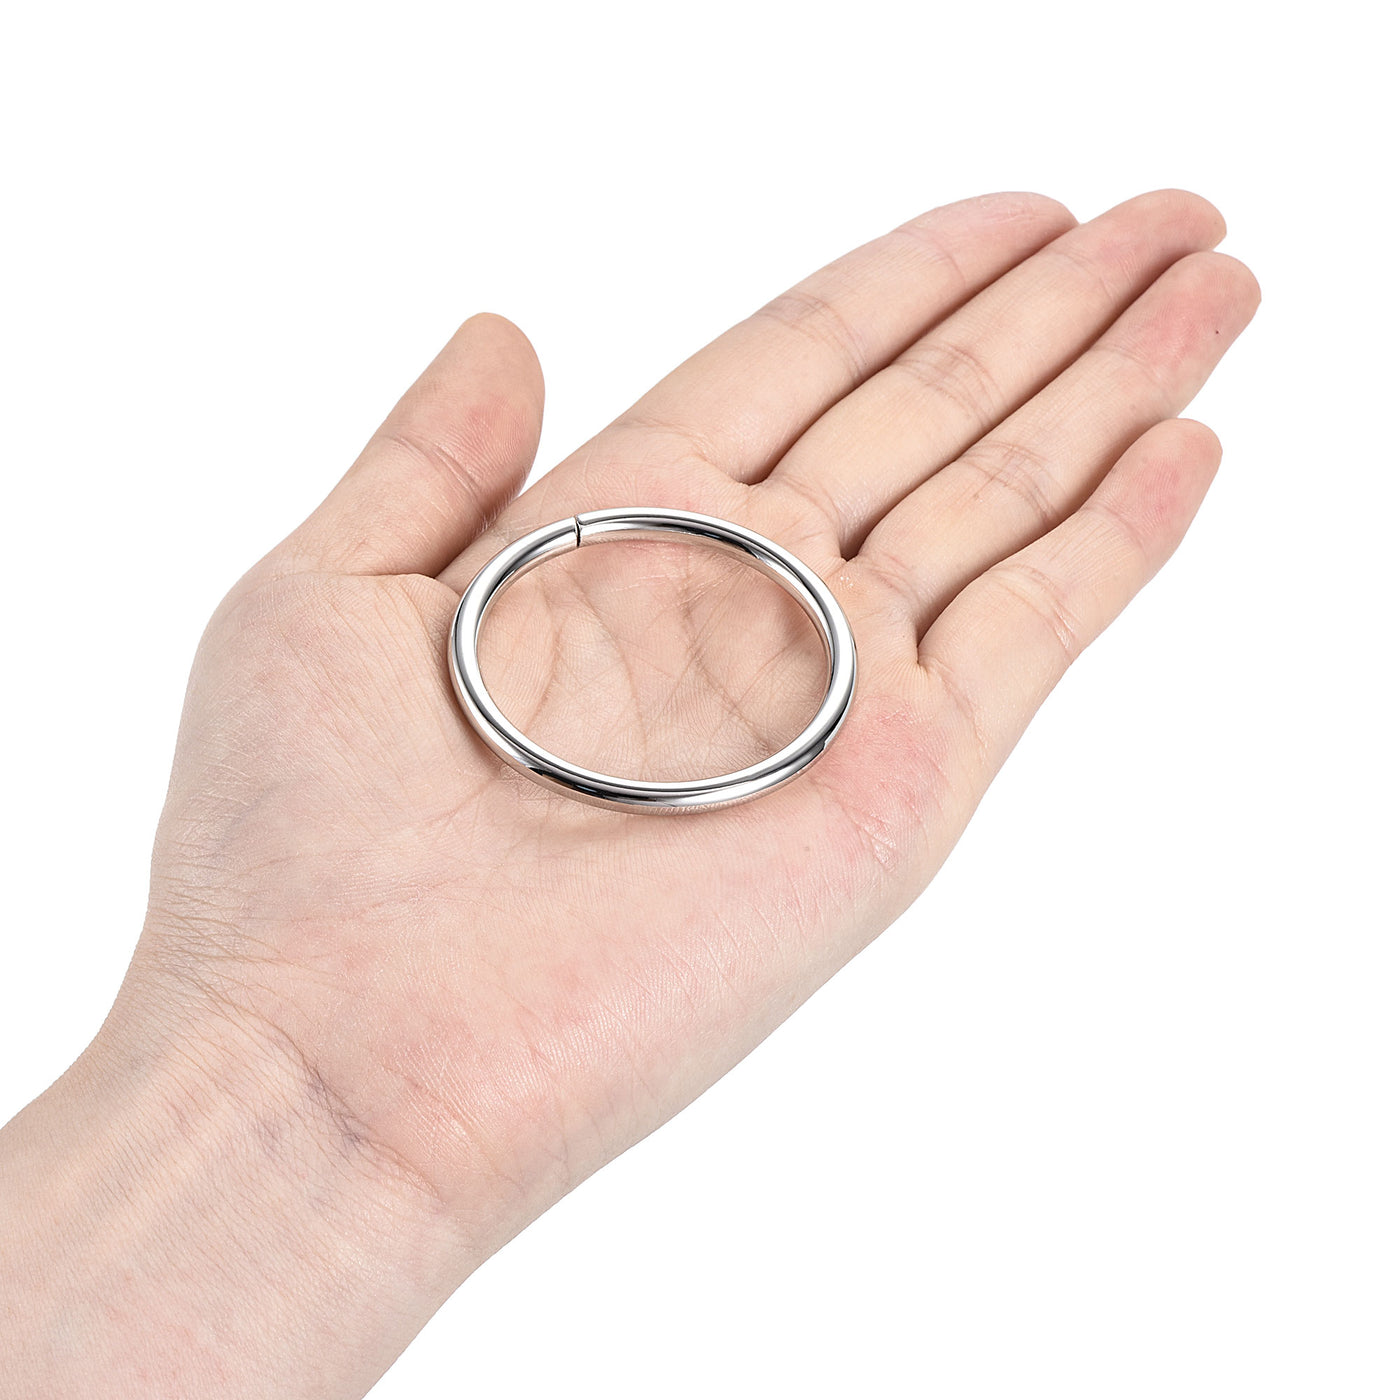 uxcell Uxcell Metal O Ring 38mm(1.5") ID 3.8mm Thickness Non-Welded Rings Silver Tone 10pcs